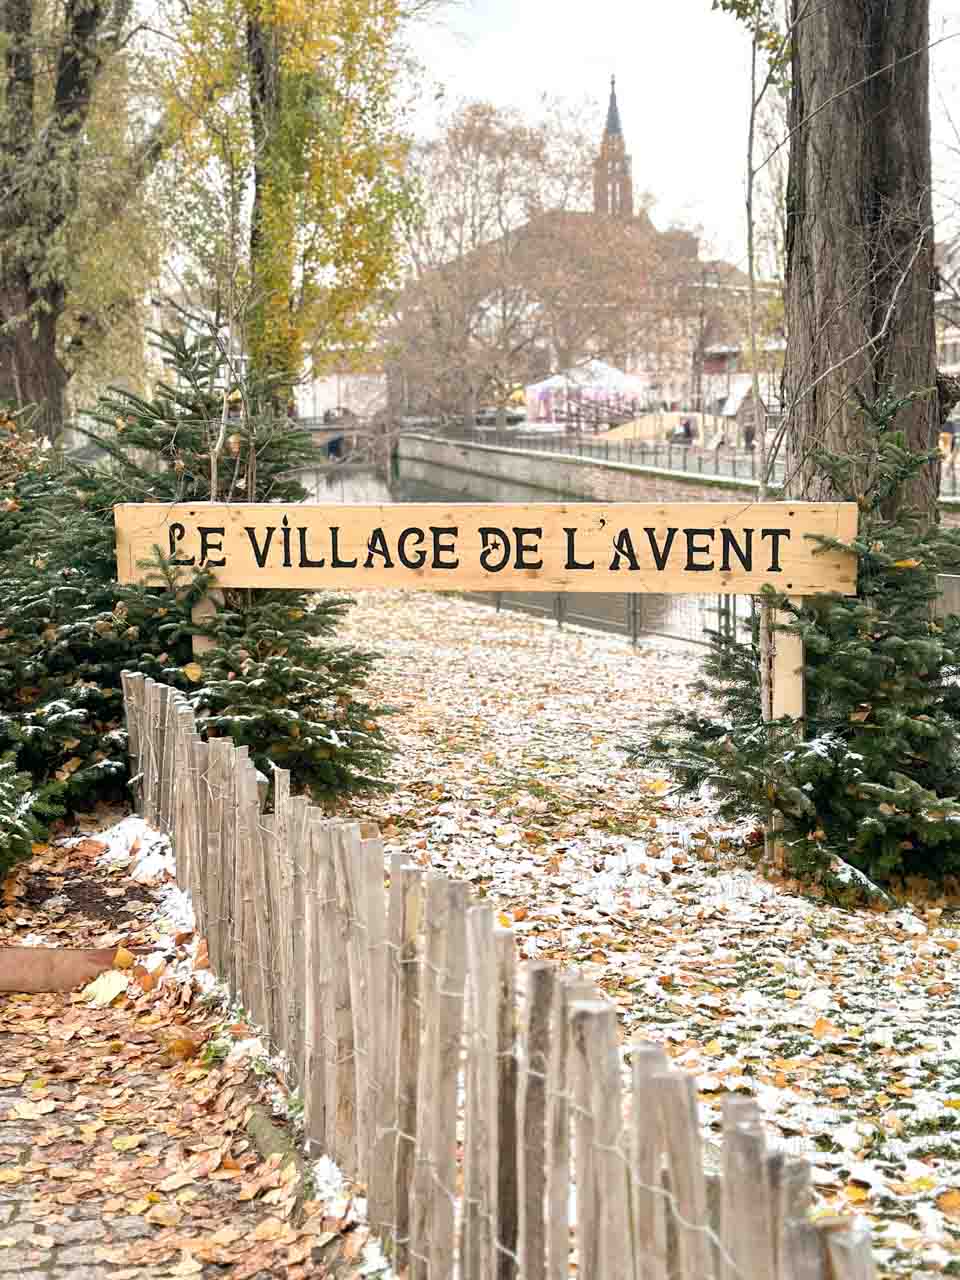 A sign that reads "Le Village de L'Avent" set against a backdrop of snow-dusted greenery, inviting visitors into a festive area on Square Louise Weiss in Strasbourg